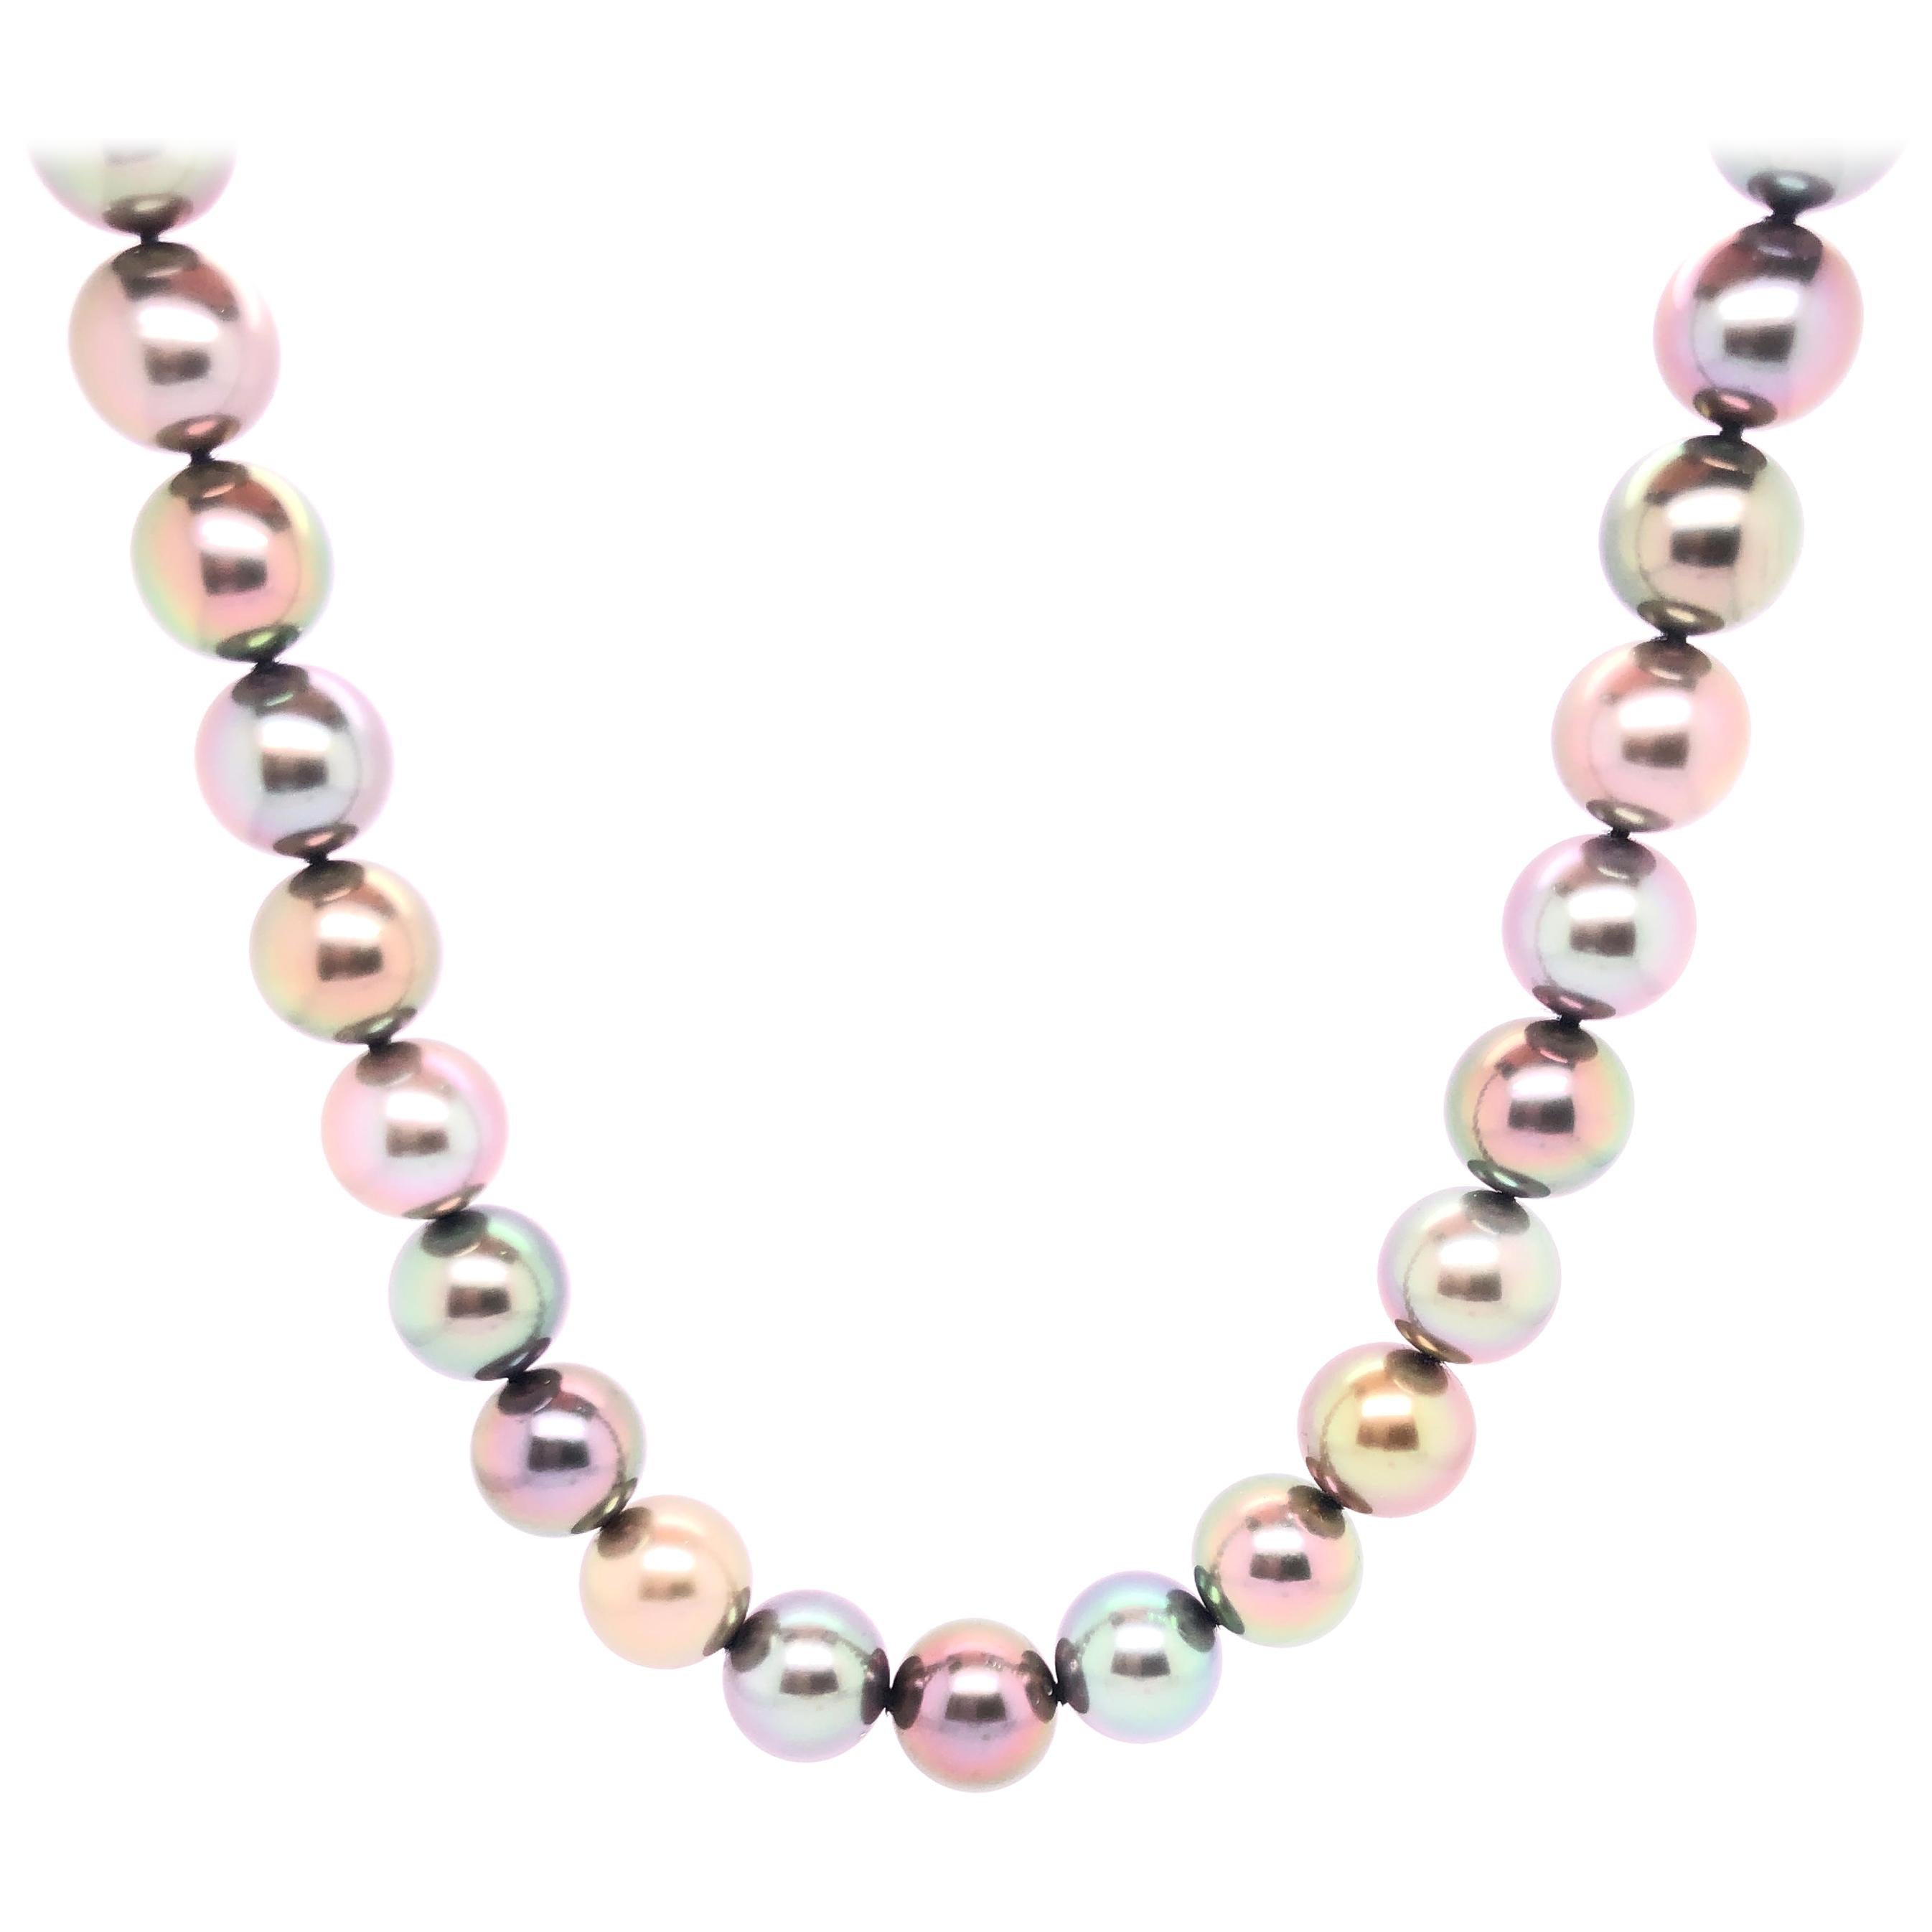 Mikimoto South Sea Pearl Necklace with White Gold Clasp